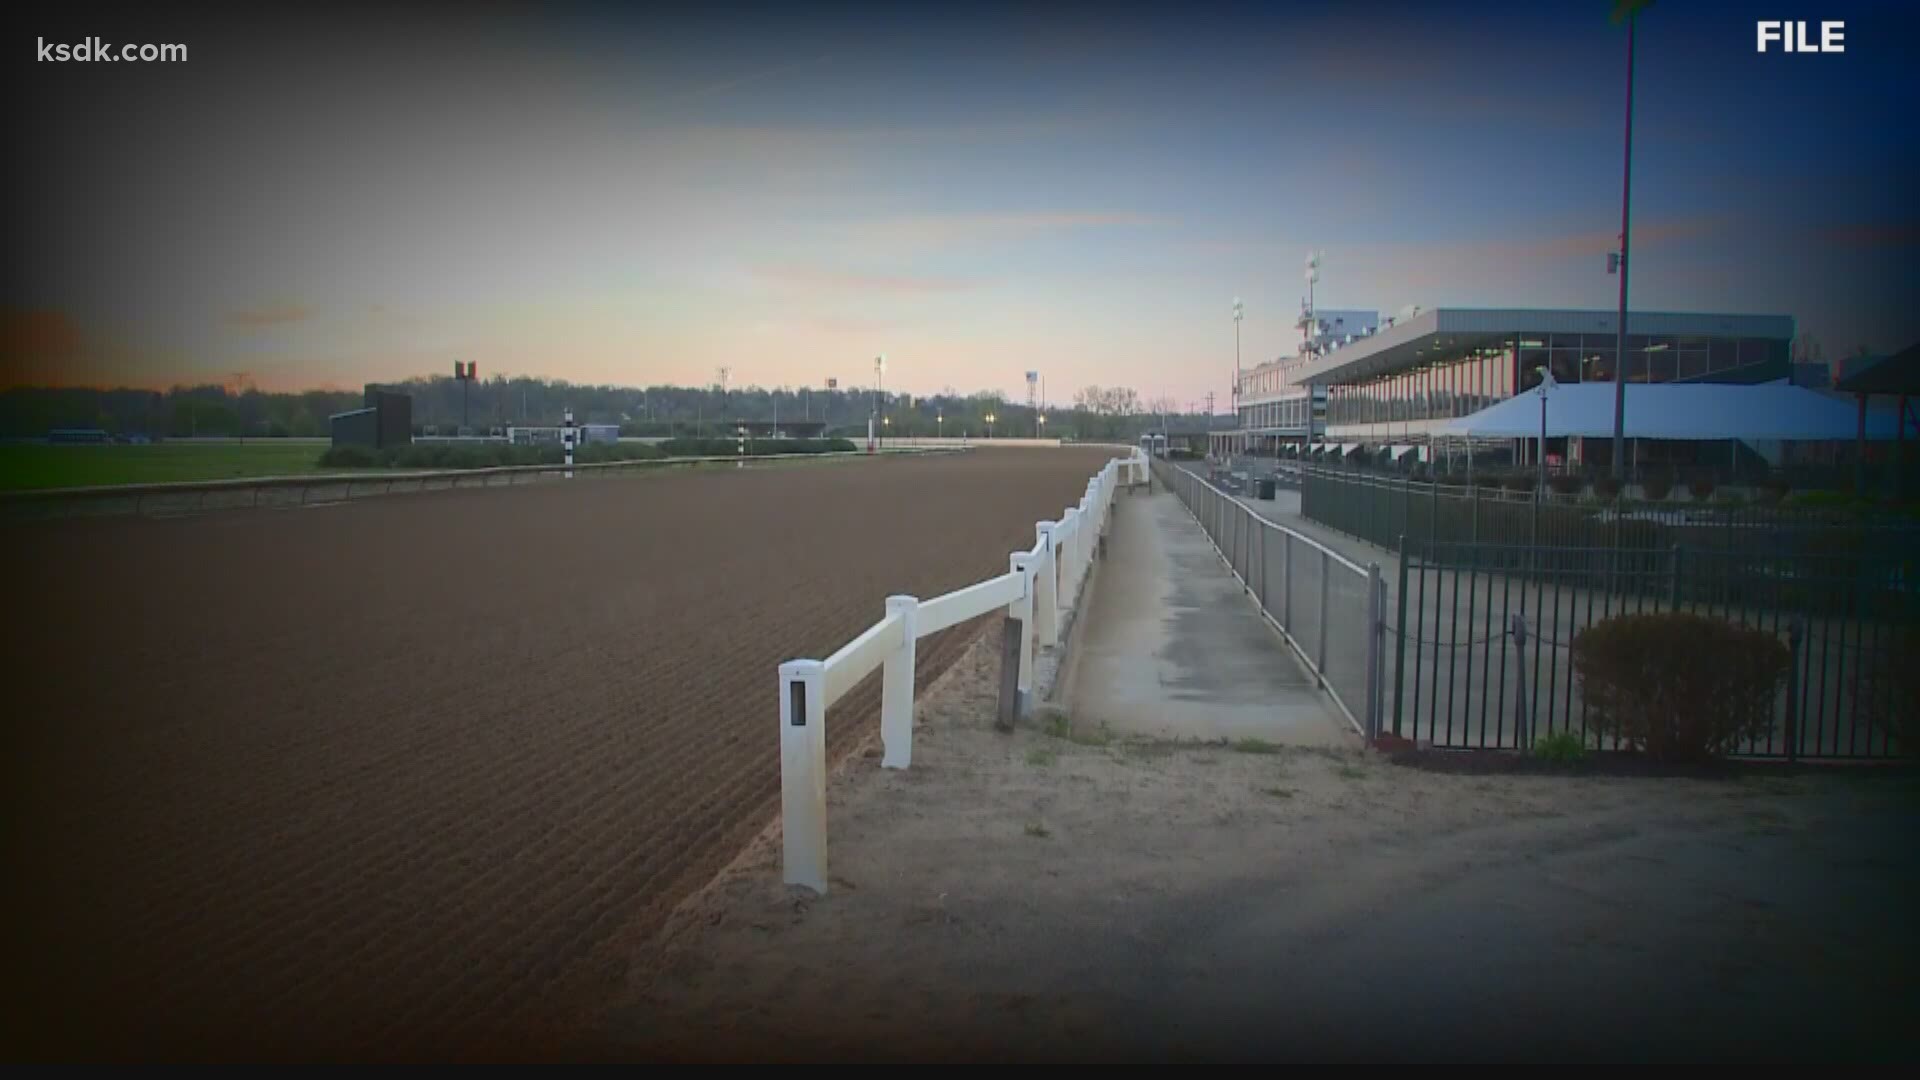 The company will also fund the renewal and running of the $250,000 St. Louis Derby, which was the track's signature event